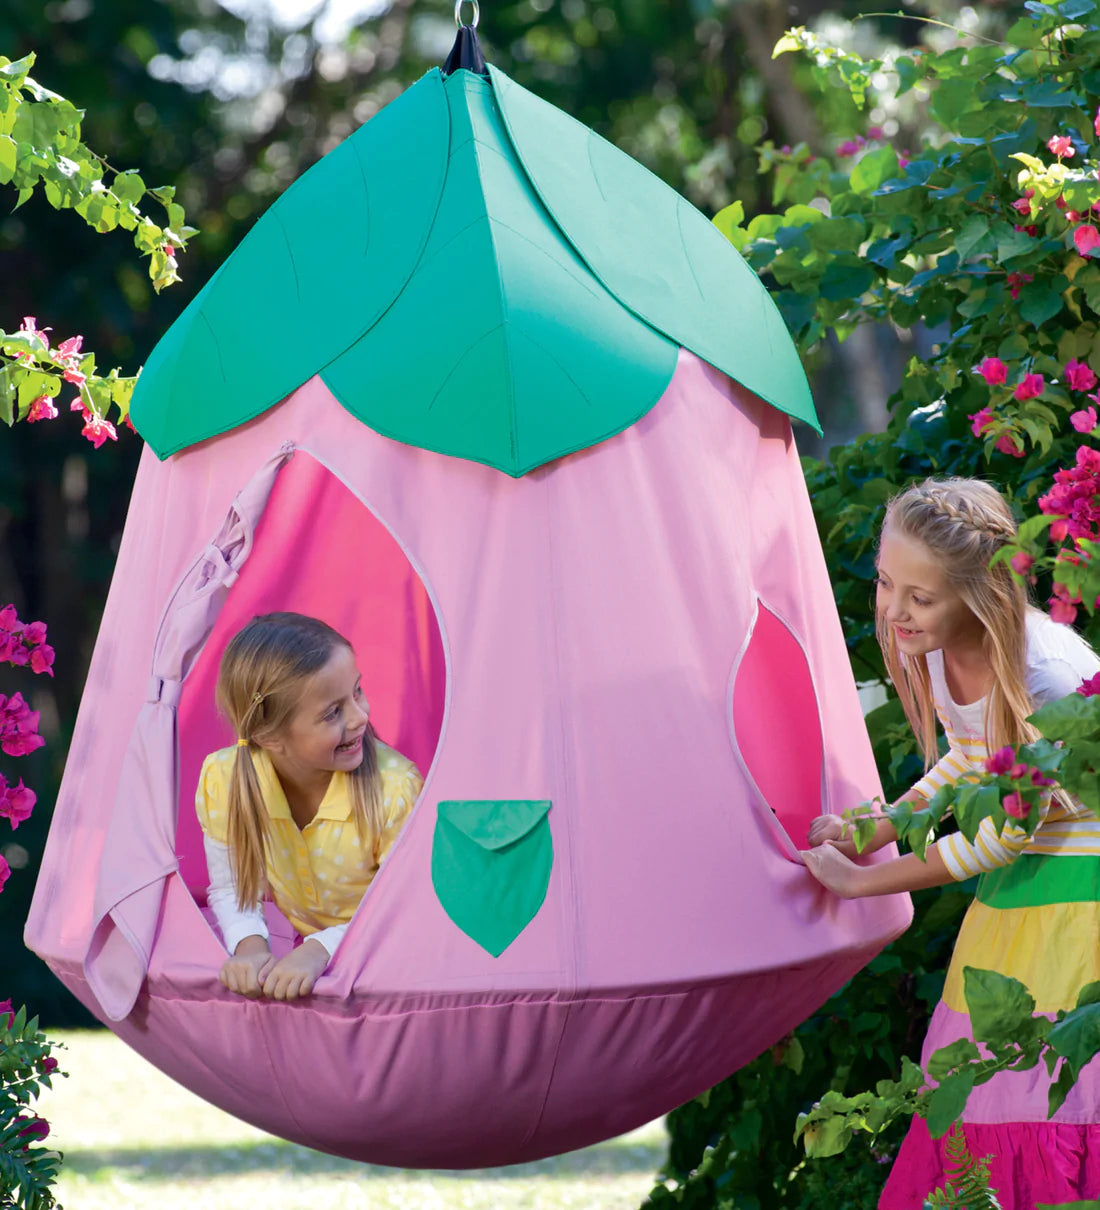 The CozyPosy HugglePod hangs in a yard. One child is looking out of the open door while another peers in through a side window.